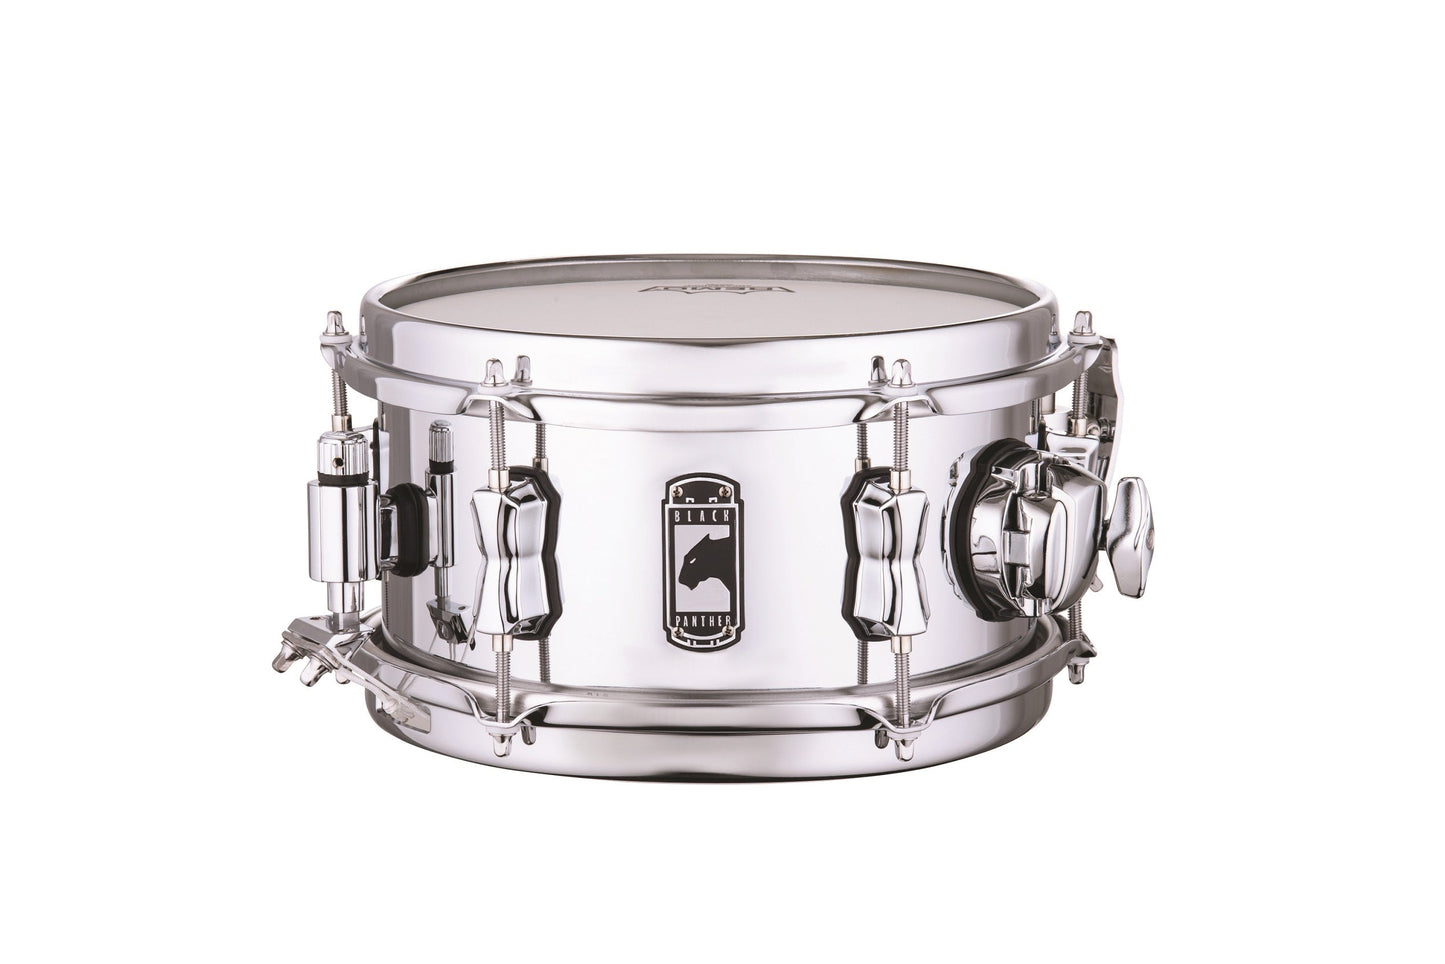 Mapex Black Panther Wasp Snare Drum - 10 x 5.5 inch - Chrome